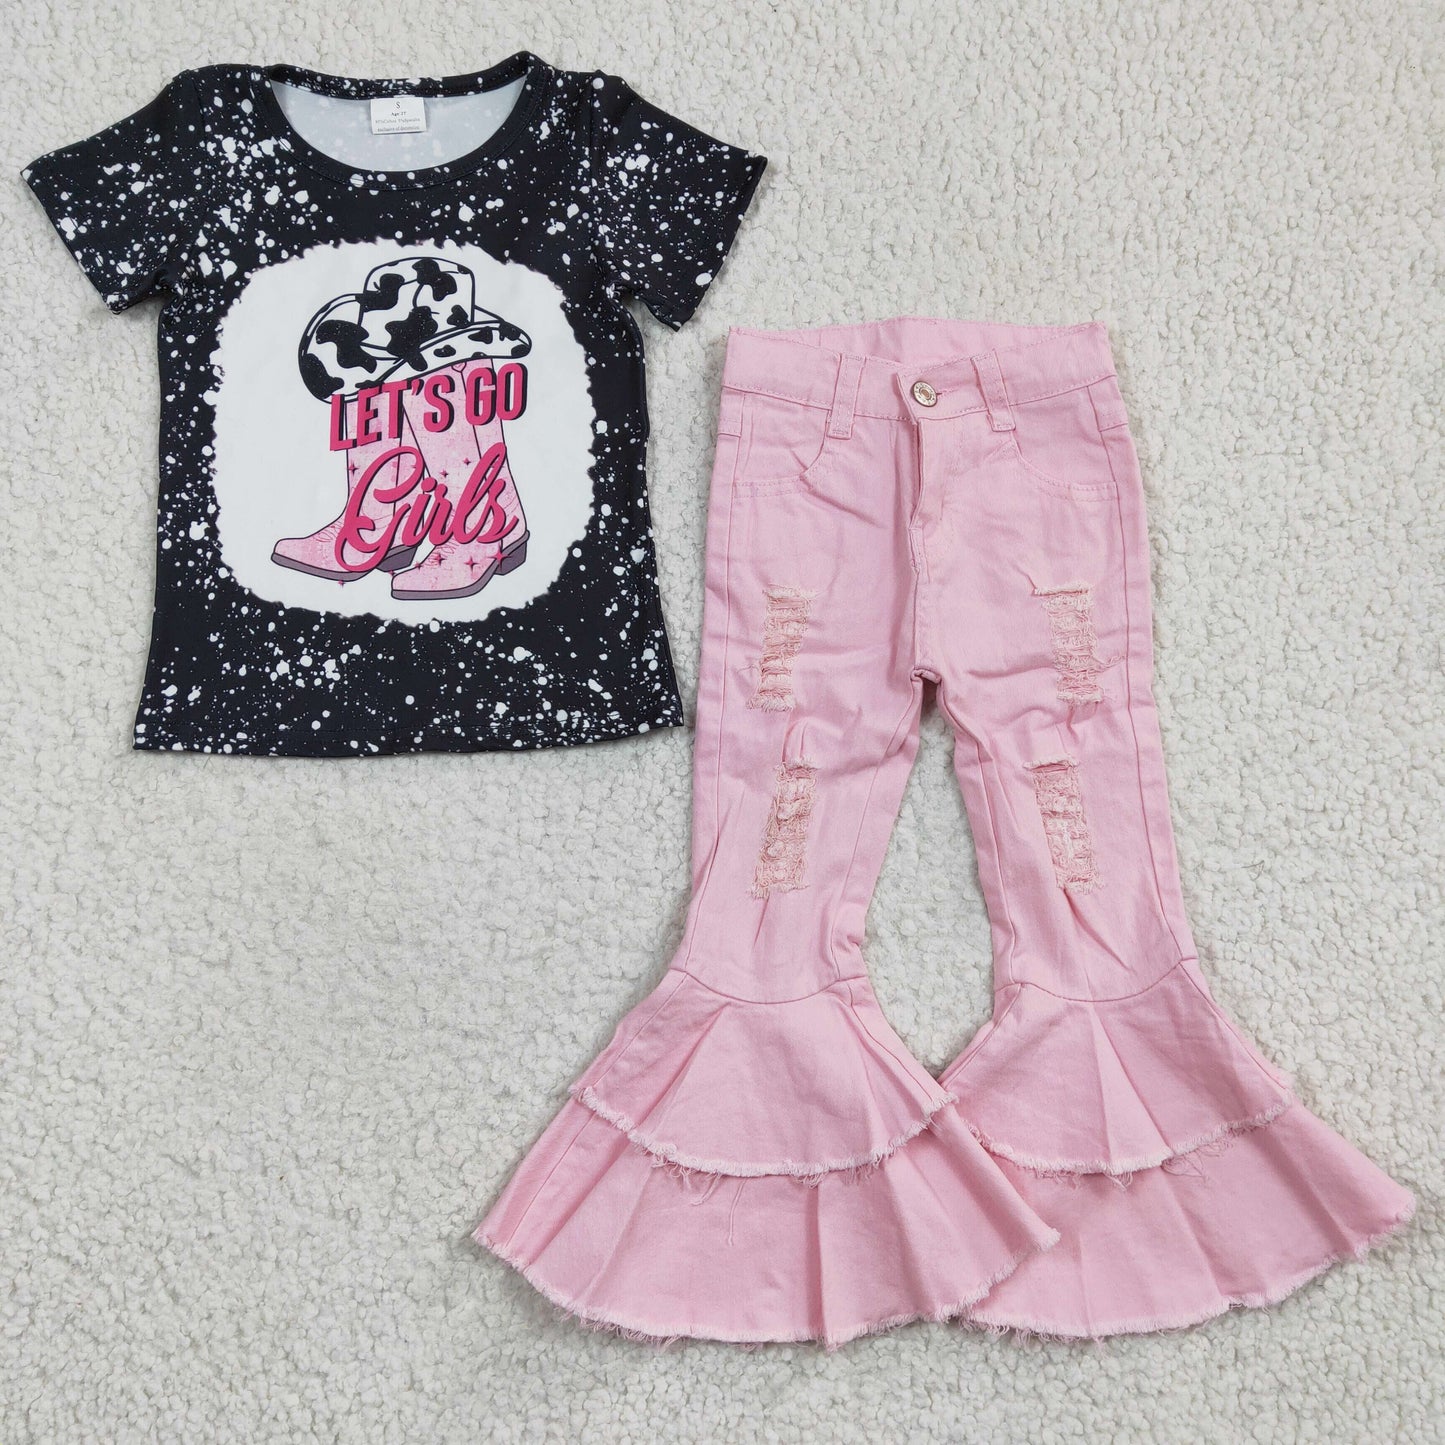 lets go girls bleach top pink ruffles jeans pants outfit,GSPO0496